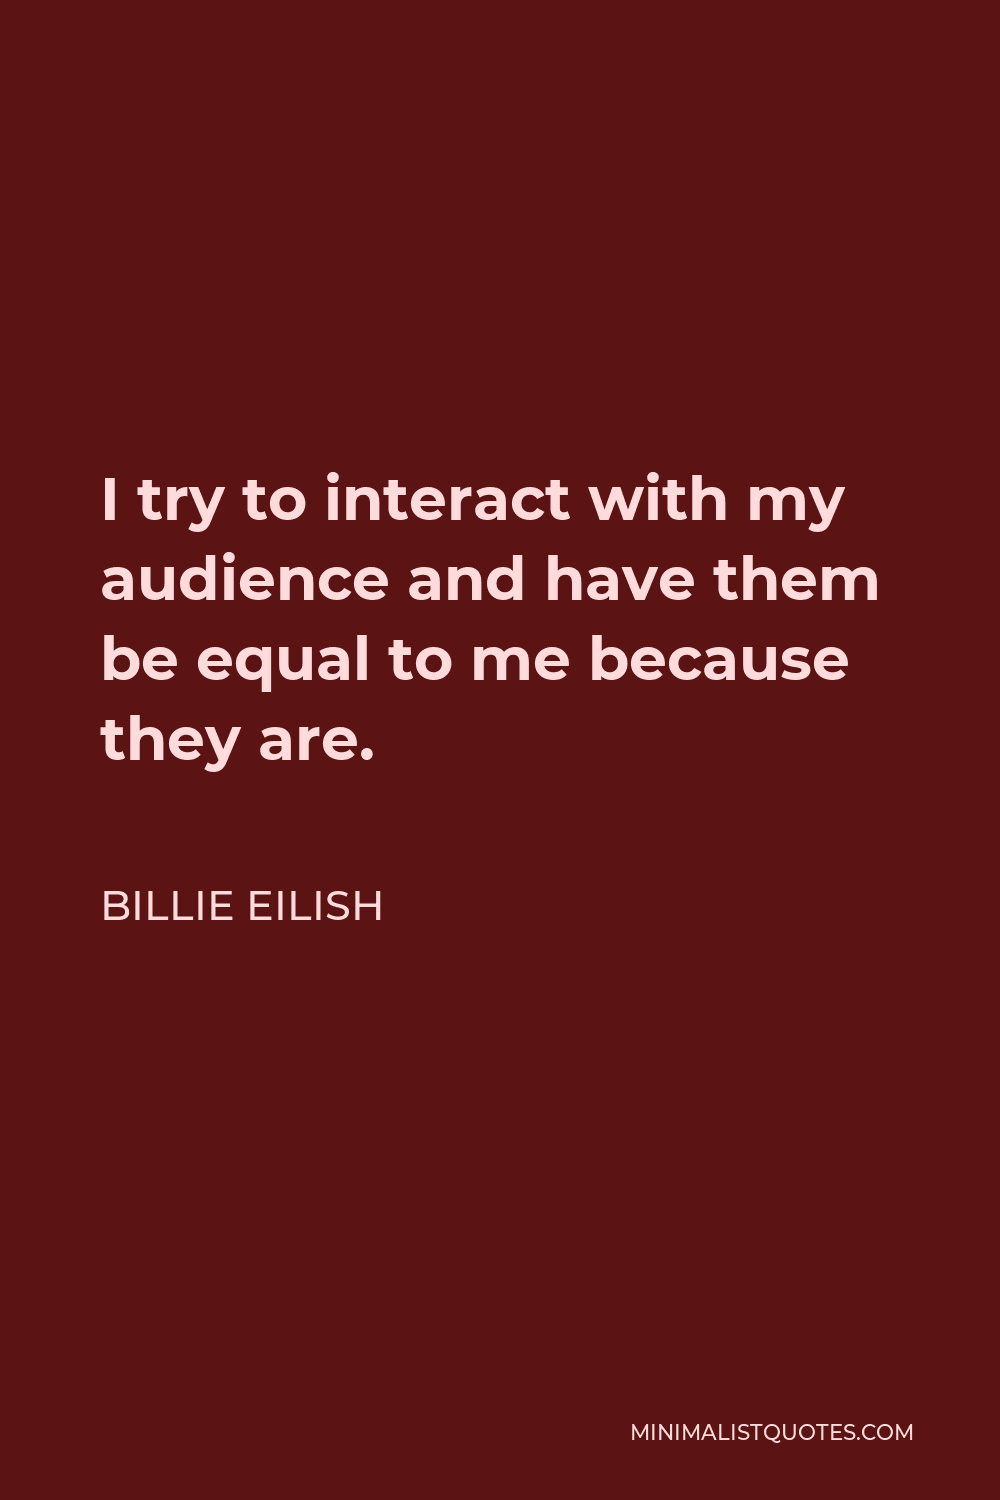 Billie Eilish Quote - I try to interact with my audience and have them be equal to me because they are.